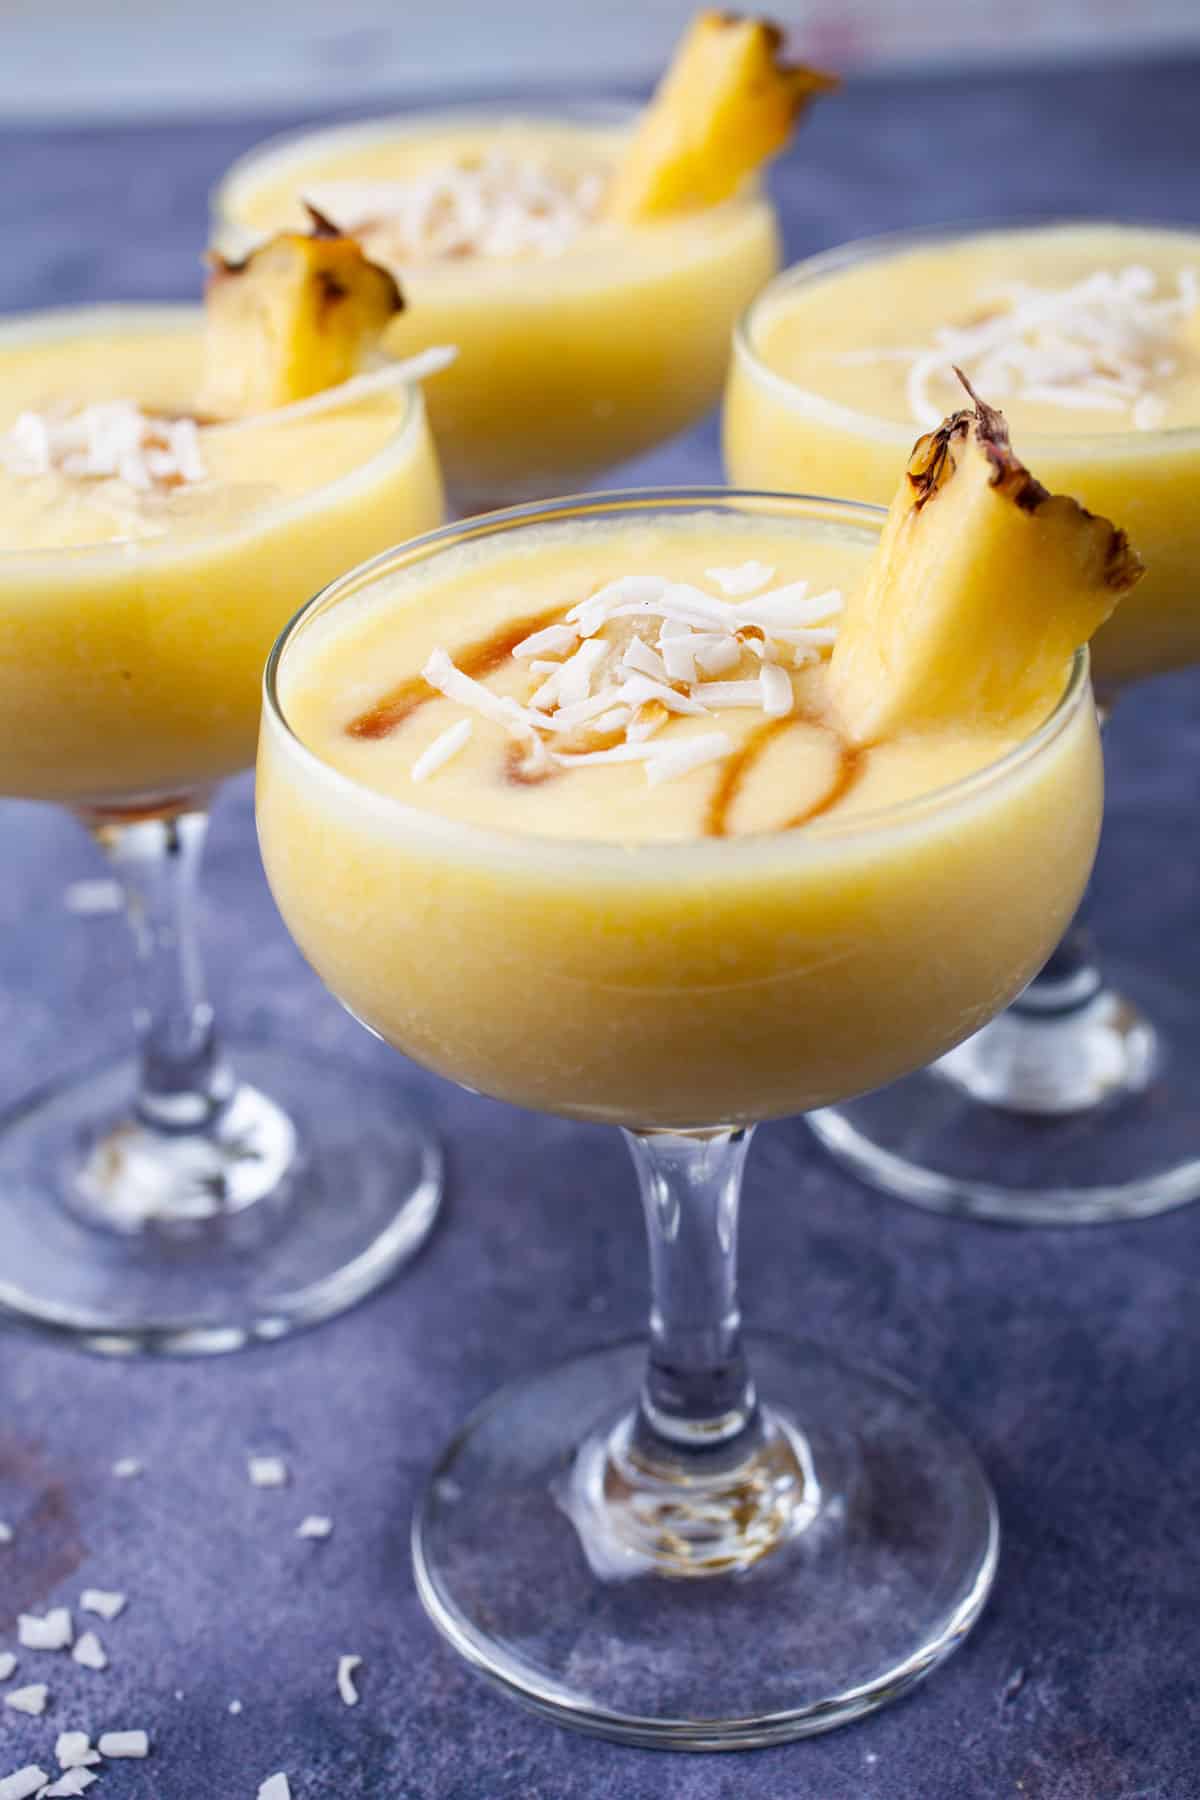 Pina colada mocktail drinks garnished with coconut shreds, a drizzle of maple syrup and fresh pineapple slices.